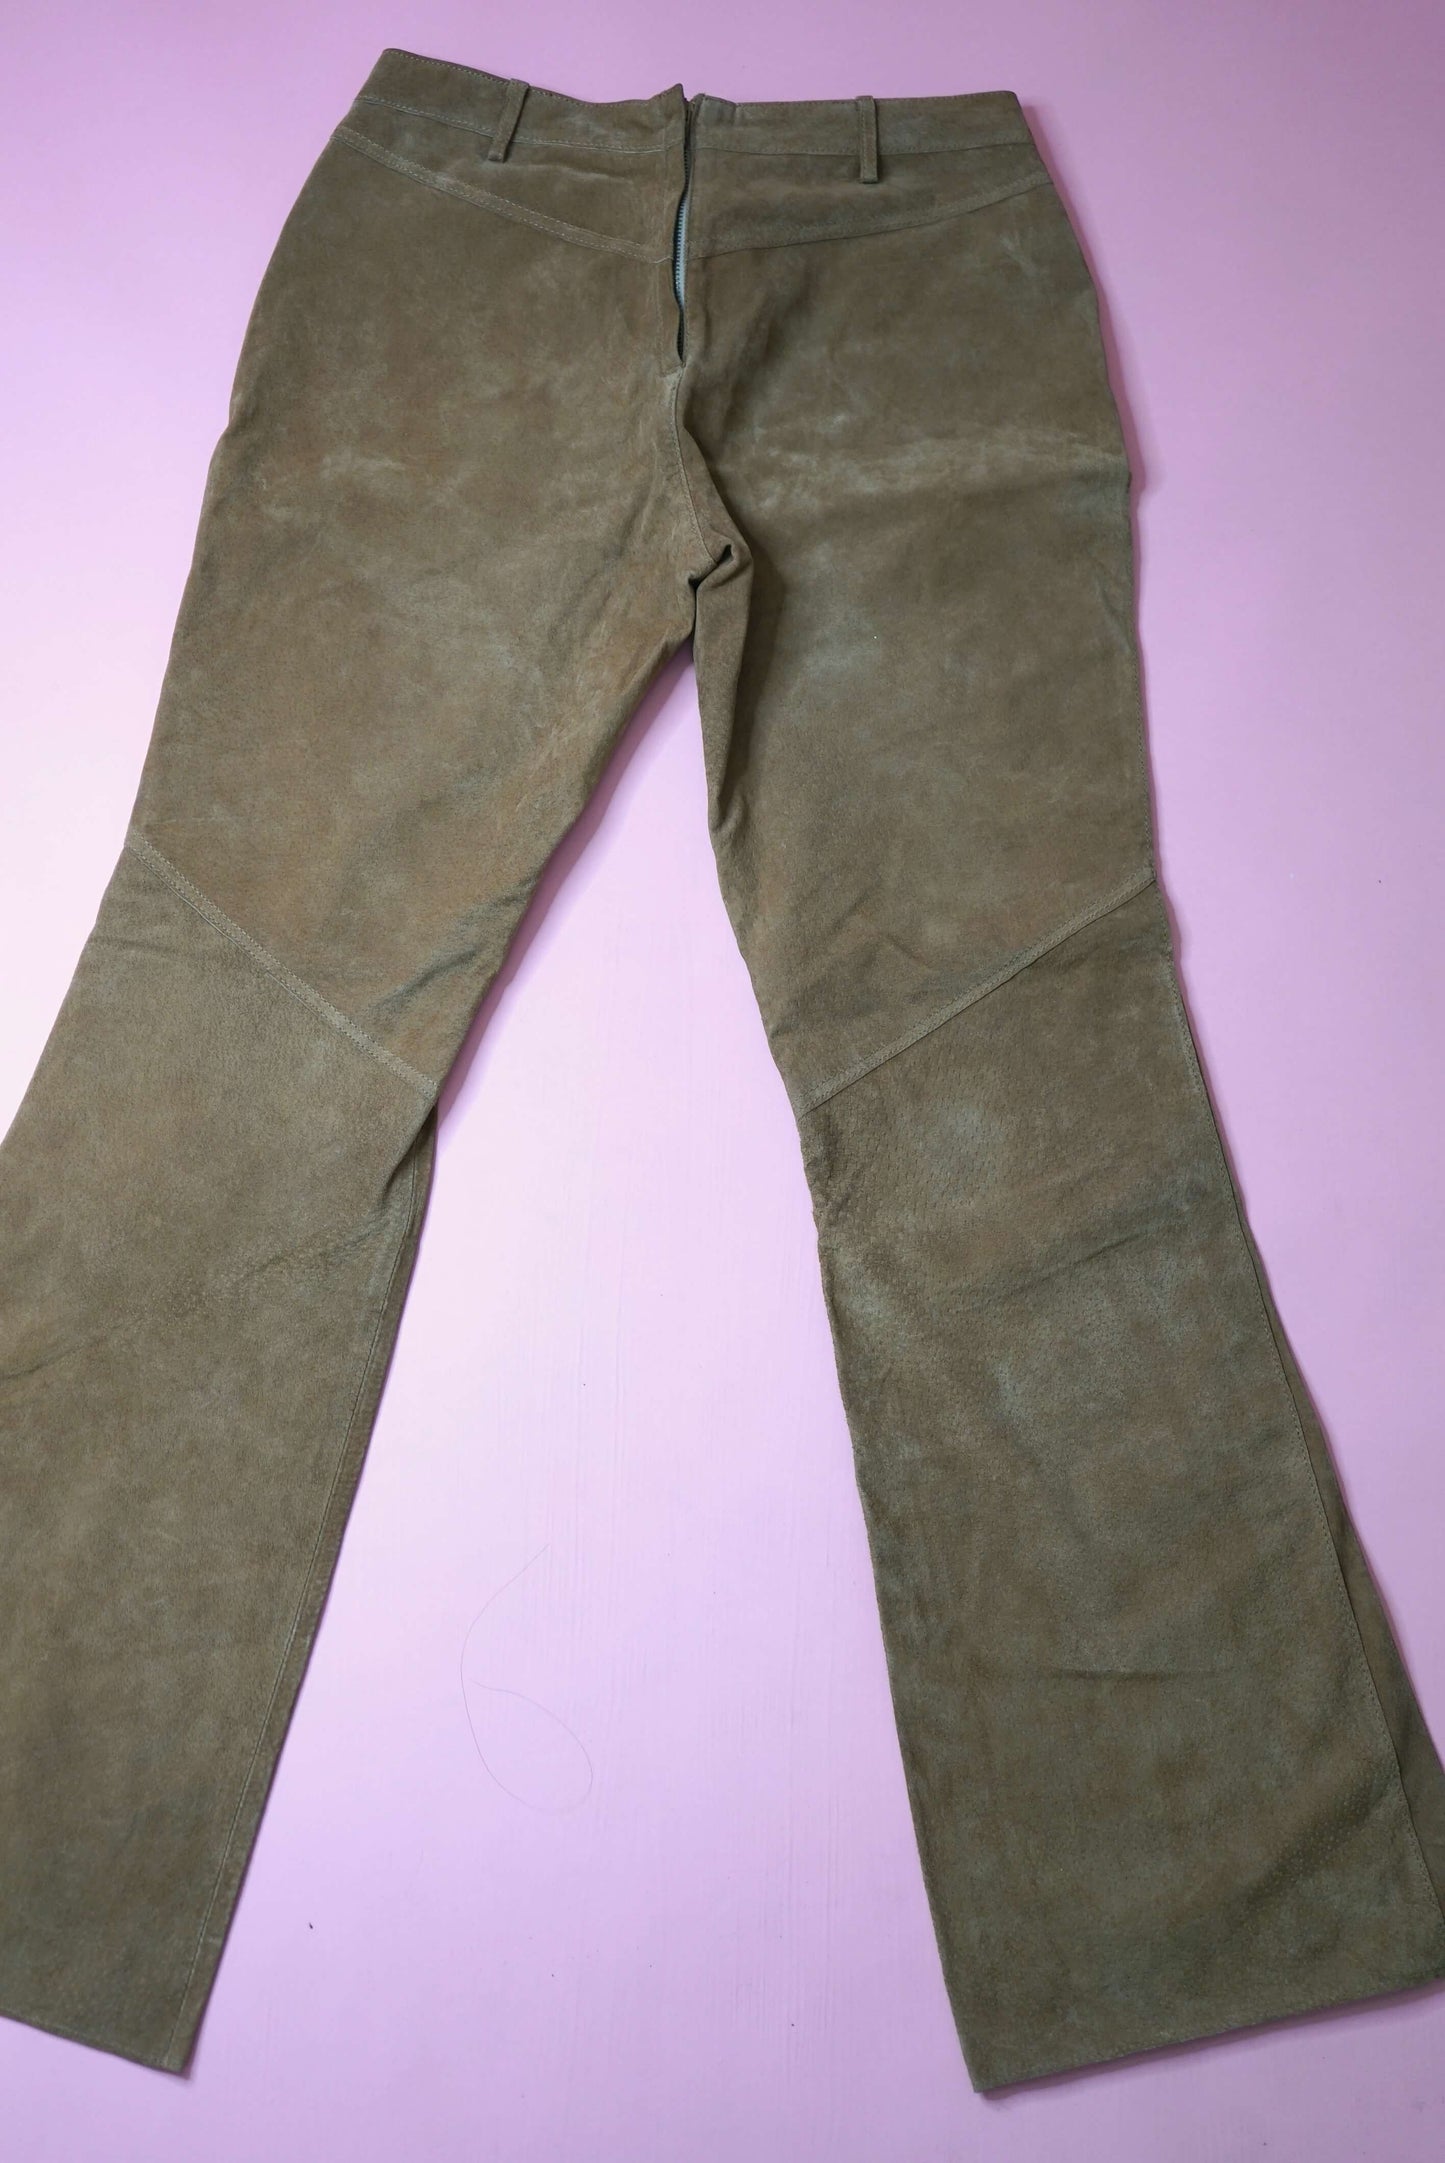 Vintage Western Suede Leather Tan Flared Trousers Low Waist Lace Up Size M W29-30